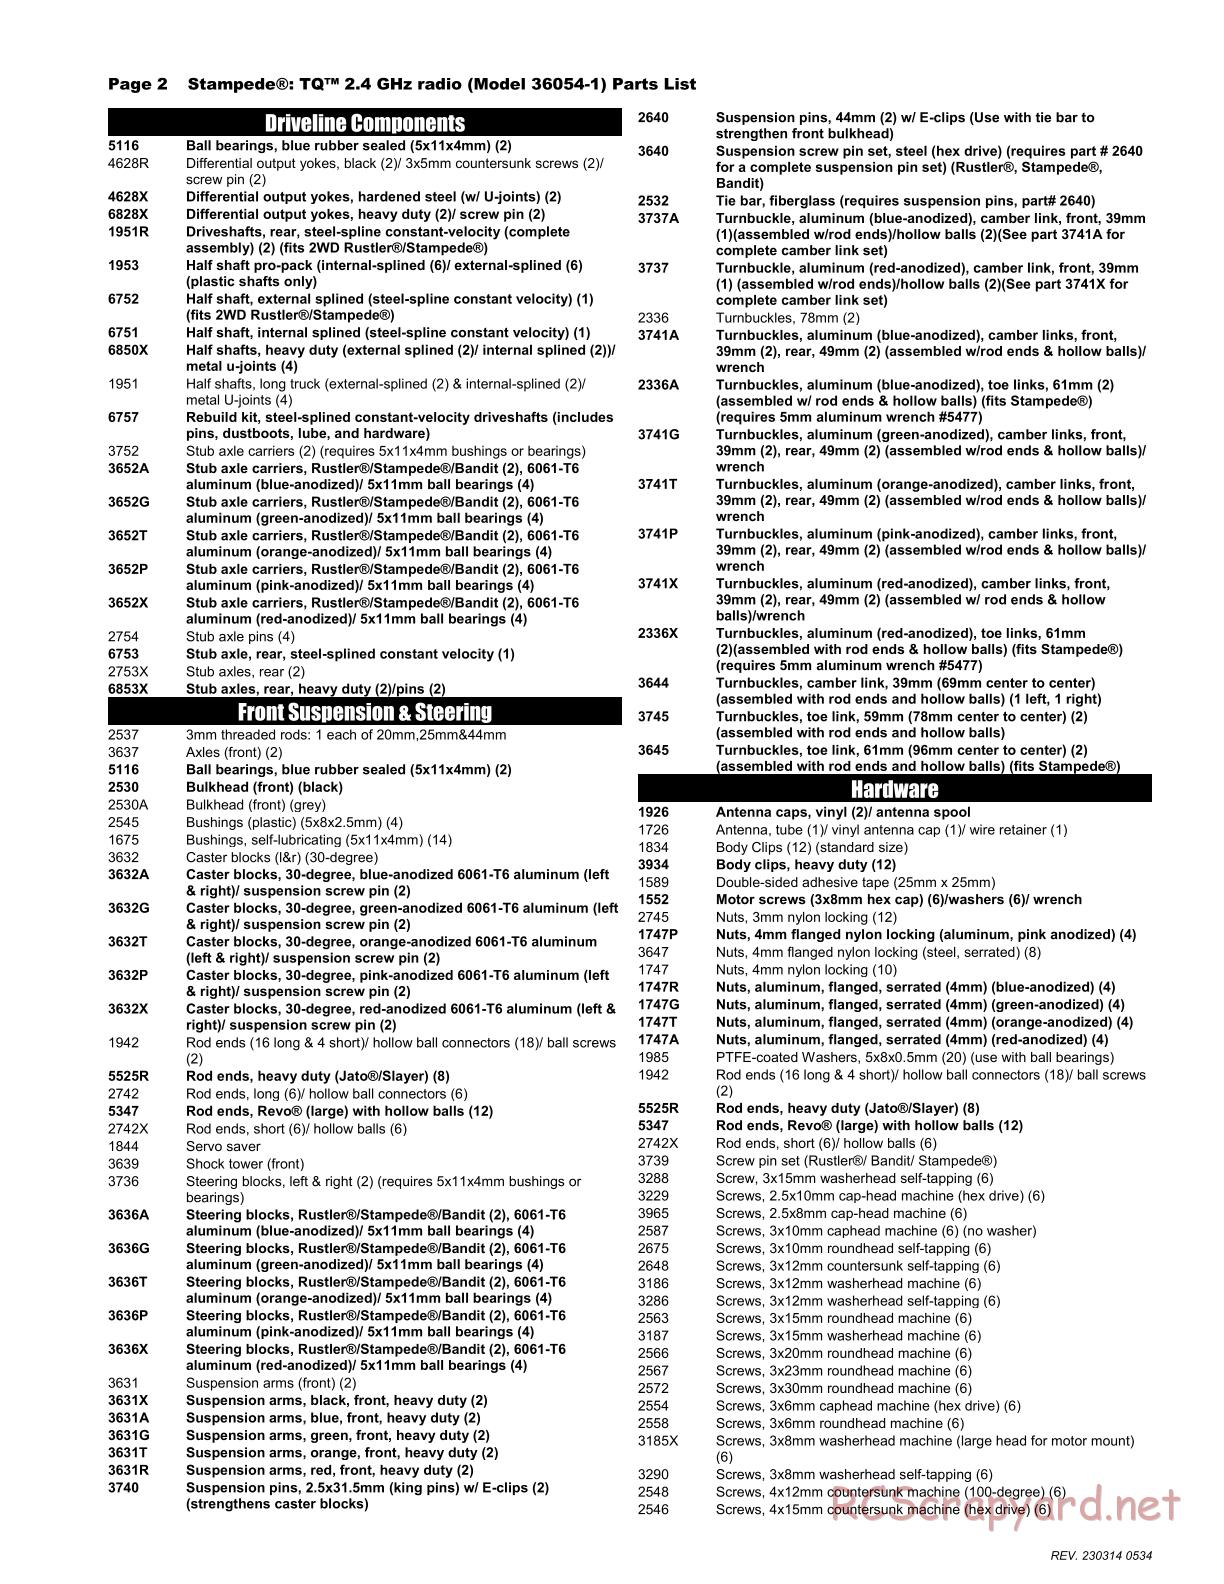 Traxxas - Stampede XL-5 (2015) - Parts List - Page 2